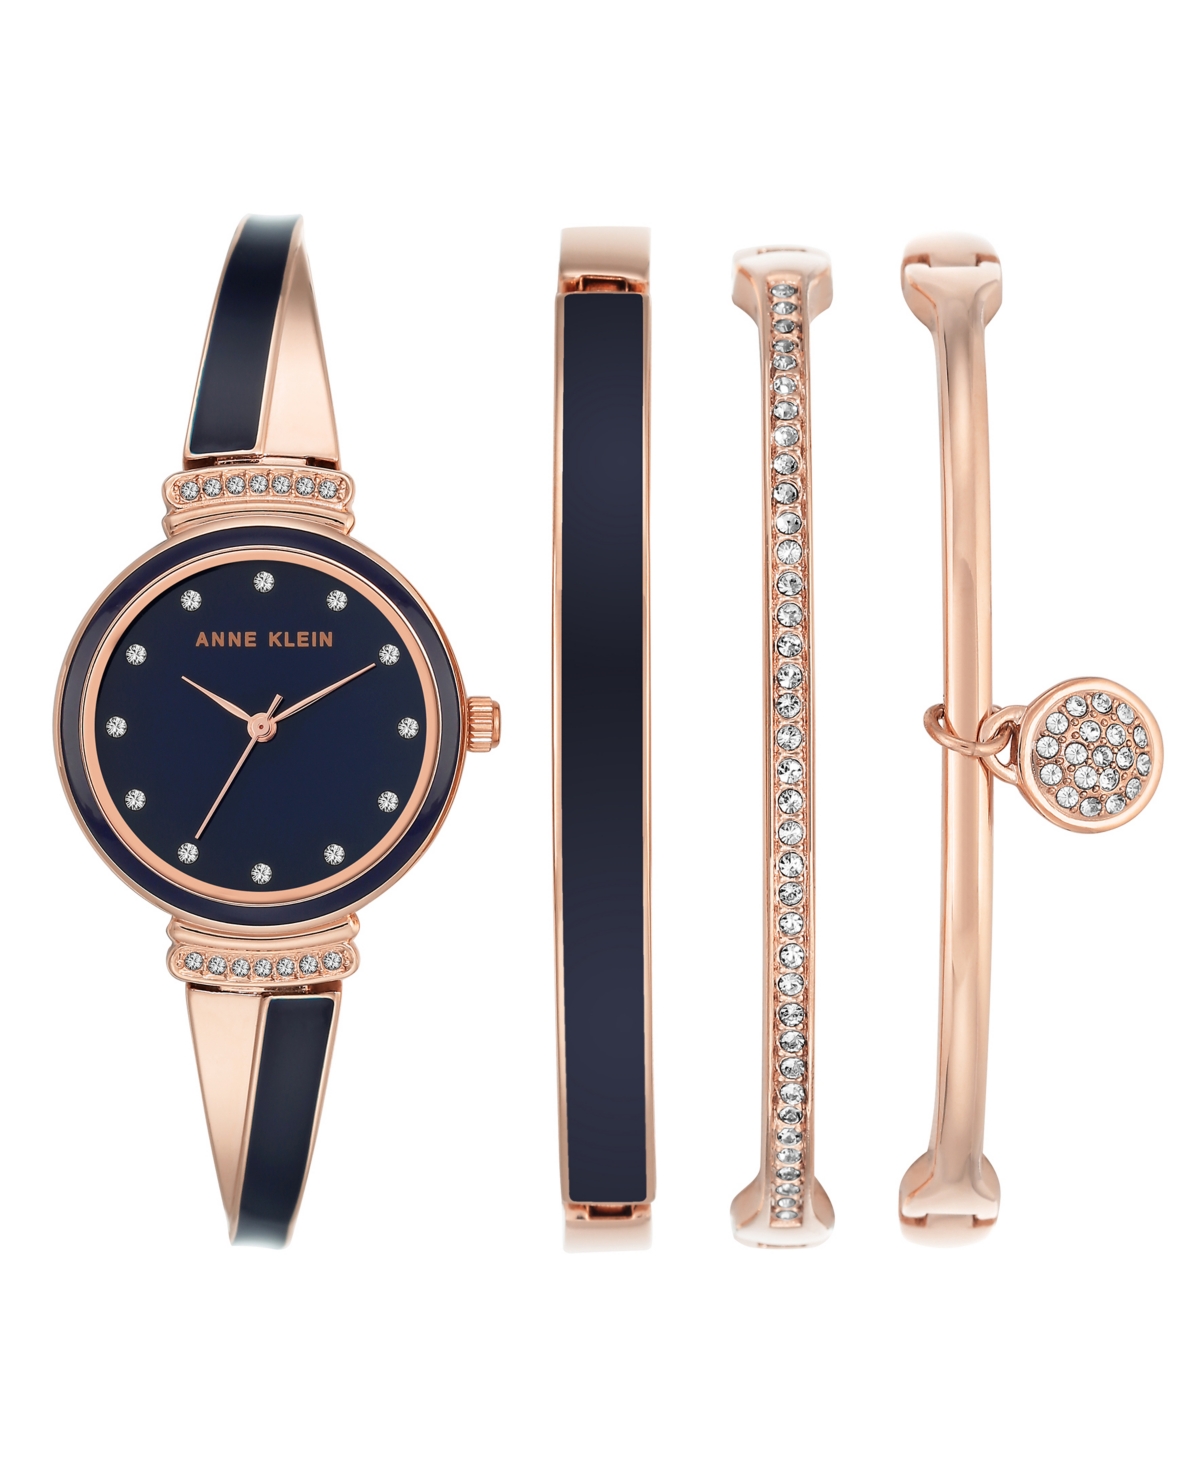 Anne Klein Women's Rose Gold-tone Alloy Bangle With Navy Enamel And Crystal Accents Fashion Watch 33.5mm Set 4 In Rose Gold-tone,navy